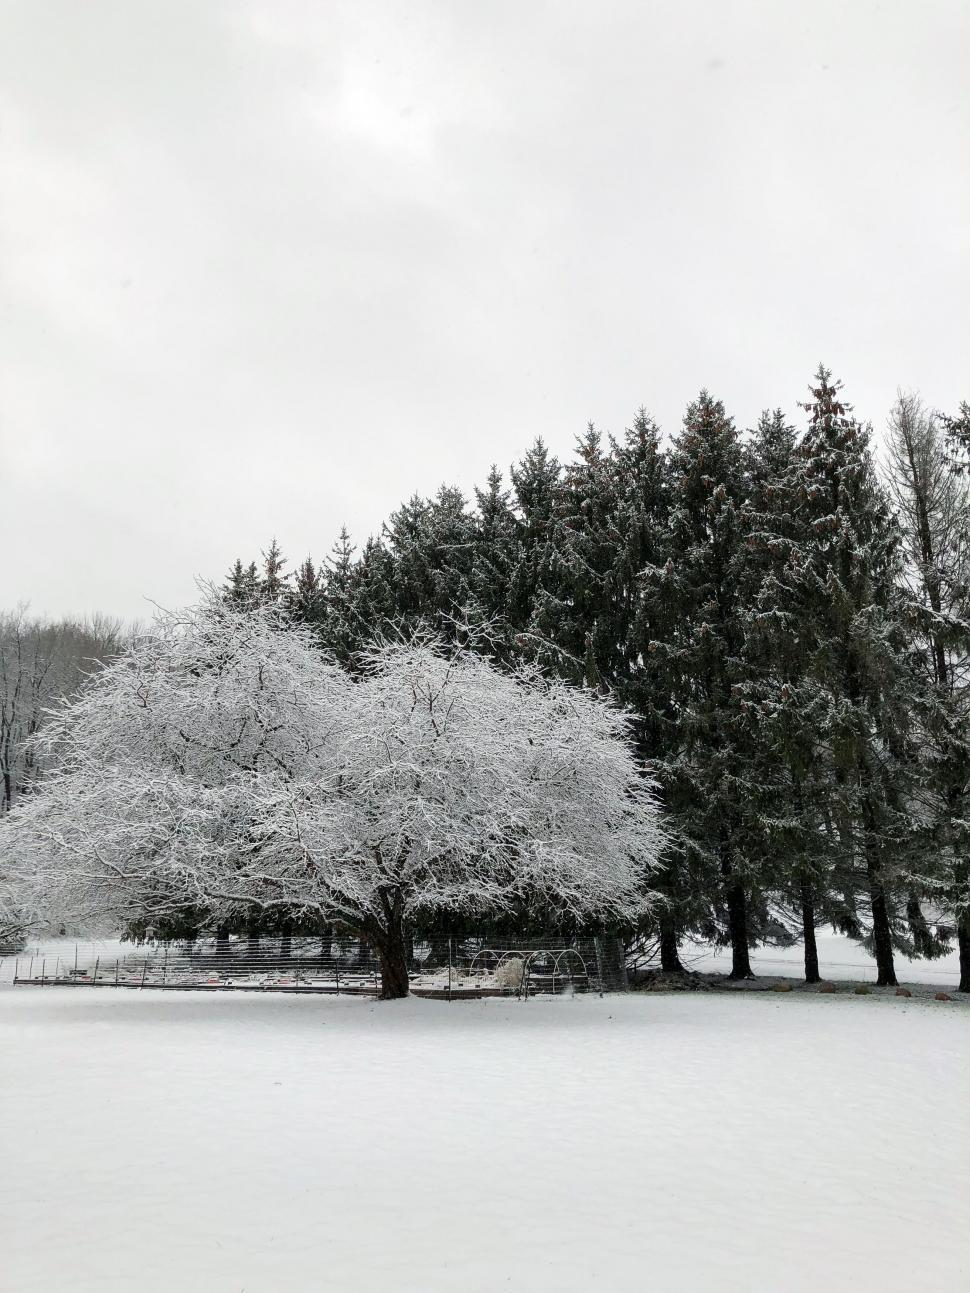 Free Image of Snow-covered tree in a serene winter scene 